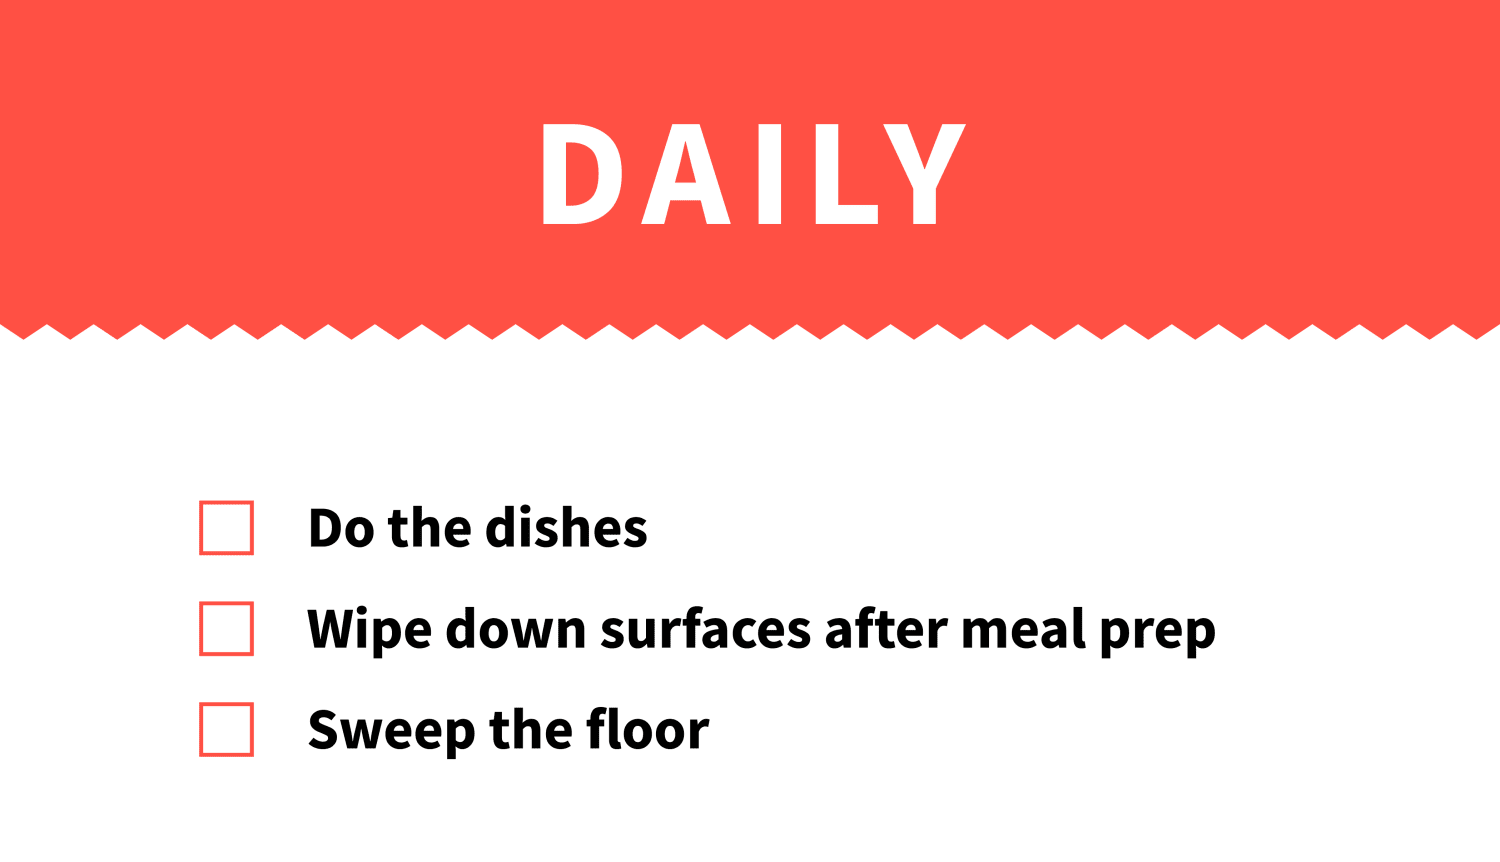 The Only Kitchen Deep Cleaning Checklist You Need